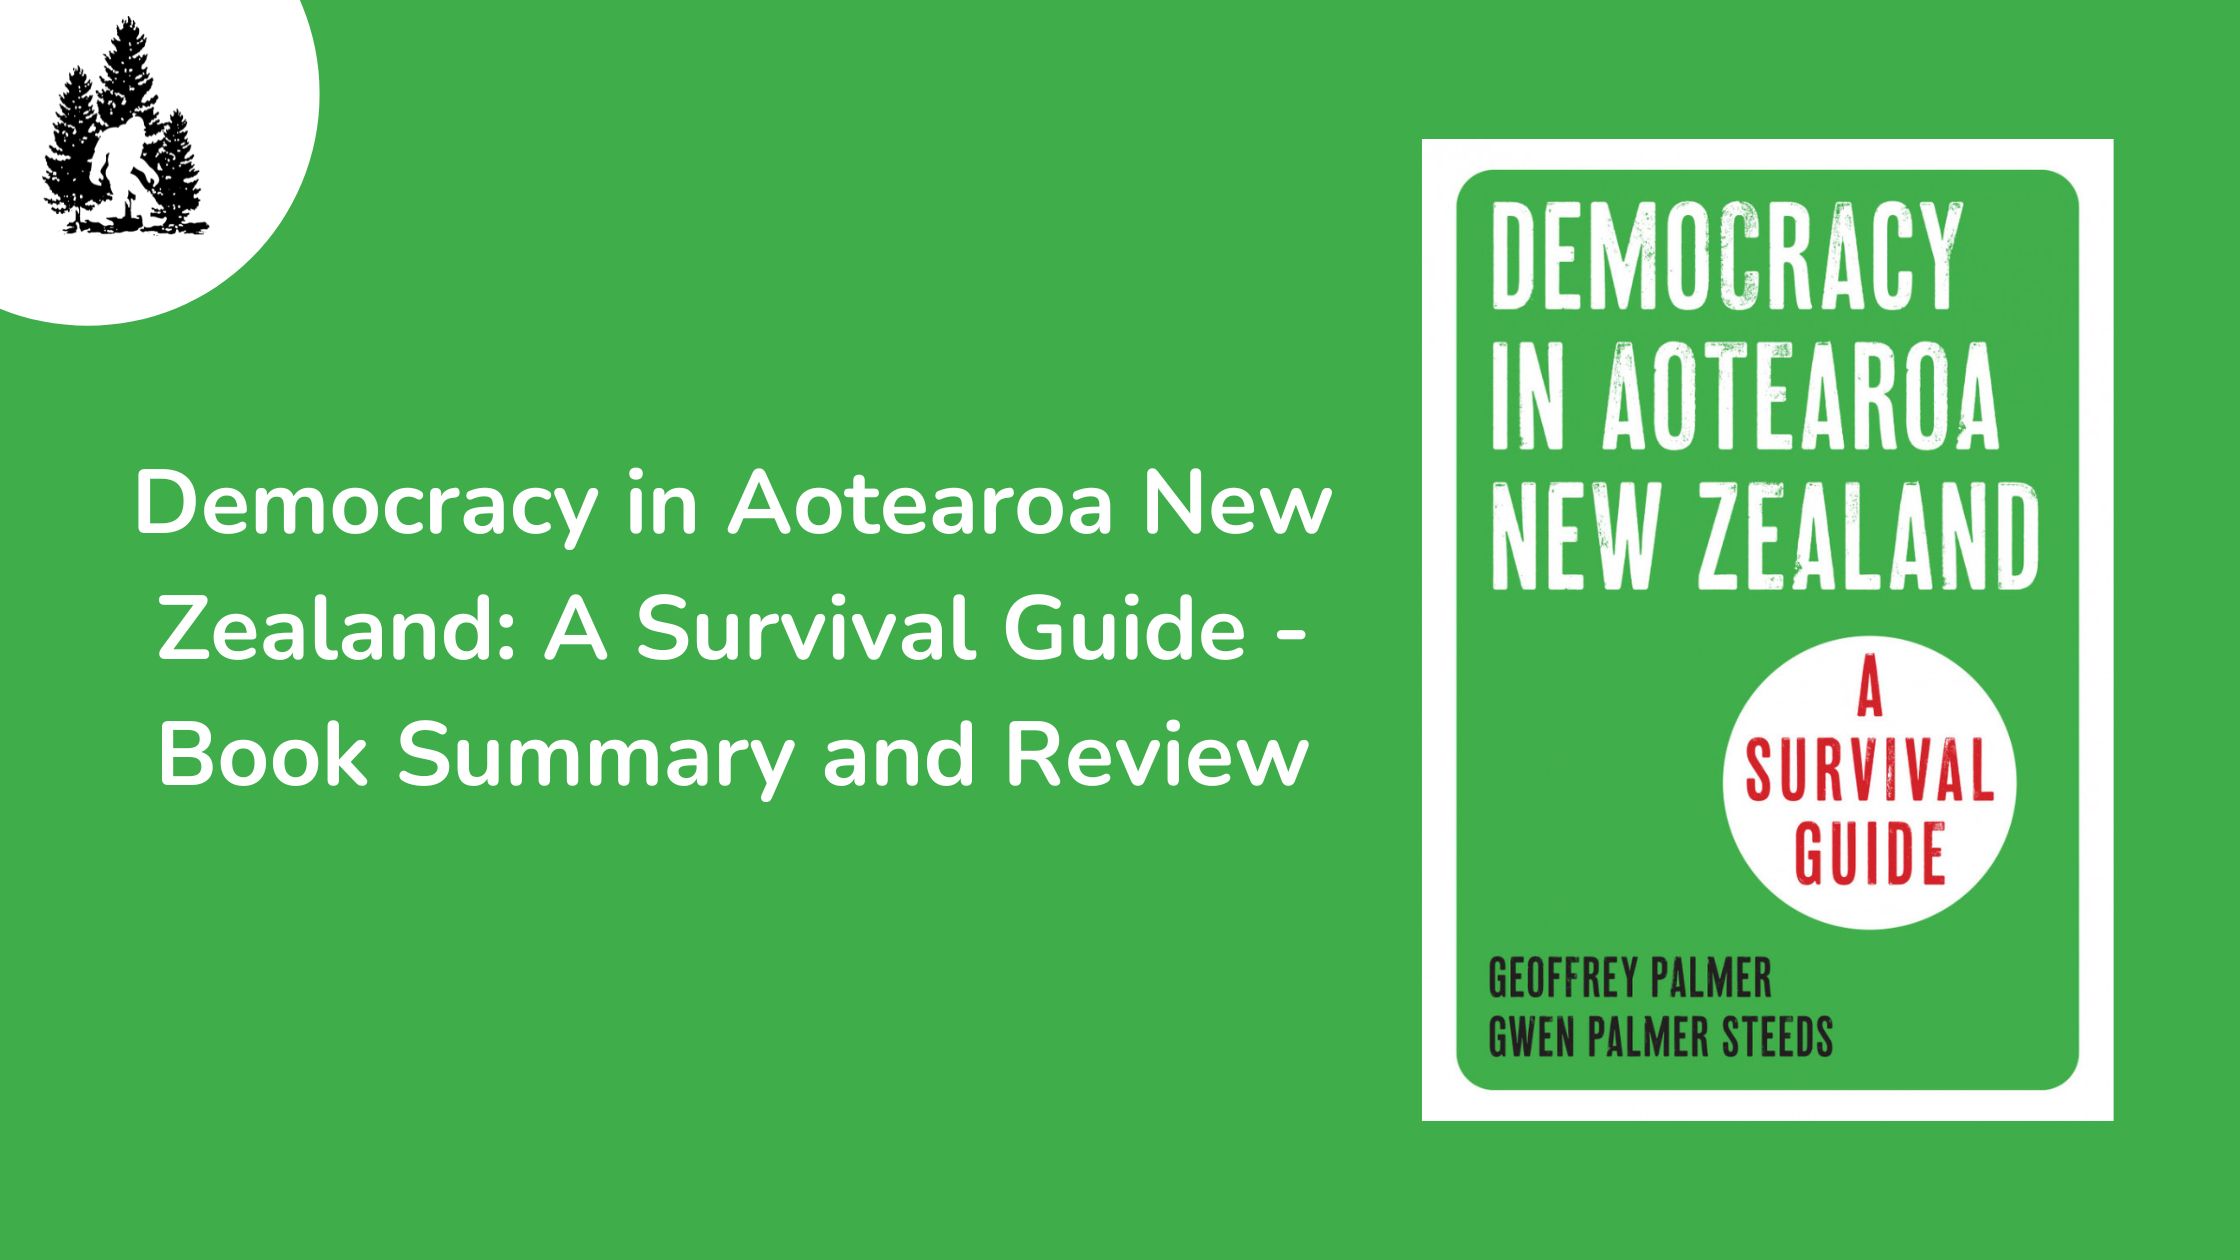 Democracy in Aotearoa New Zealand: A Survival Guide Full Book Summary and Review